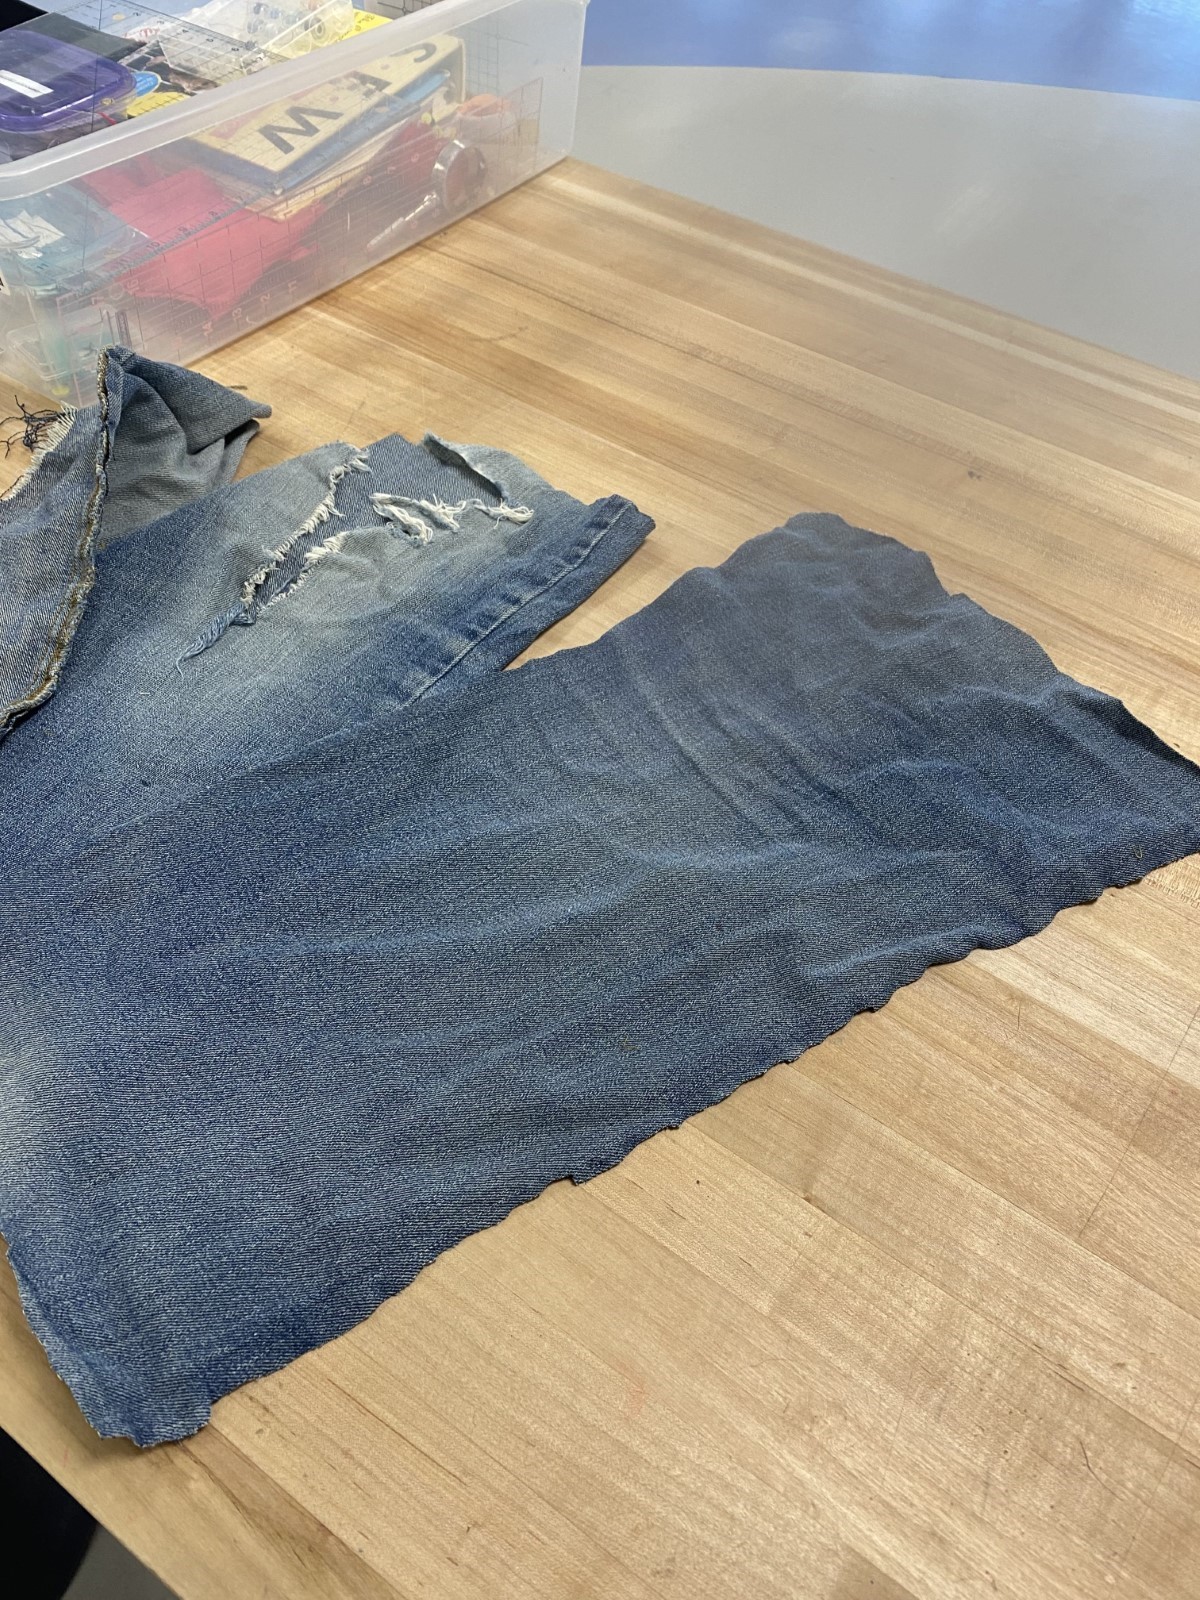 Denim panels cut from a pair of worn out jeans